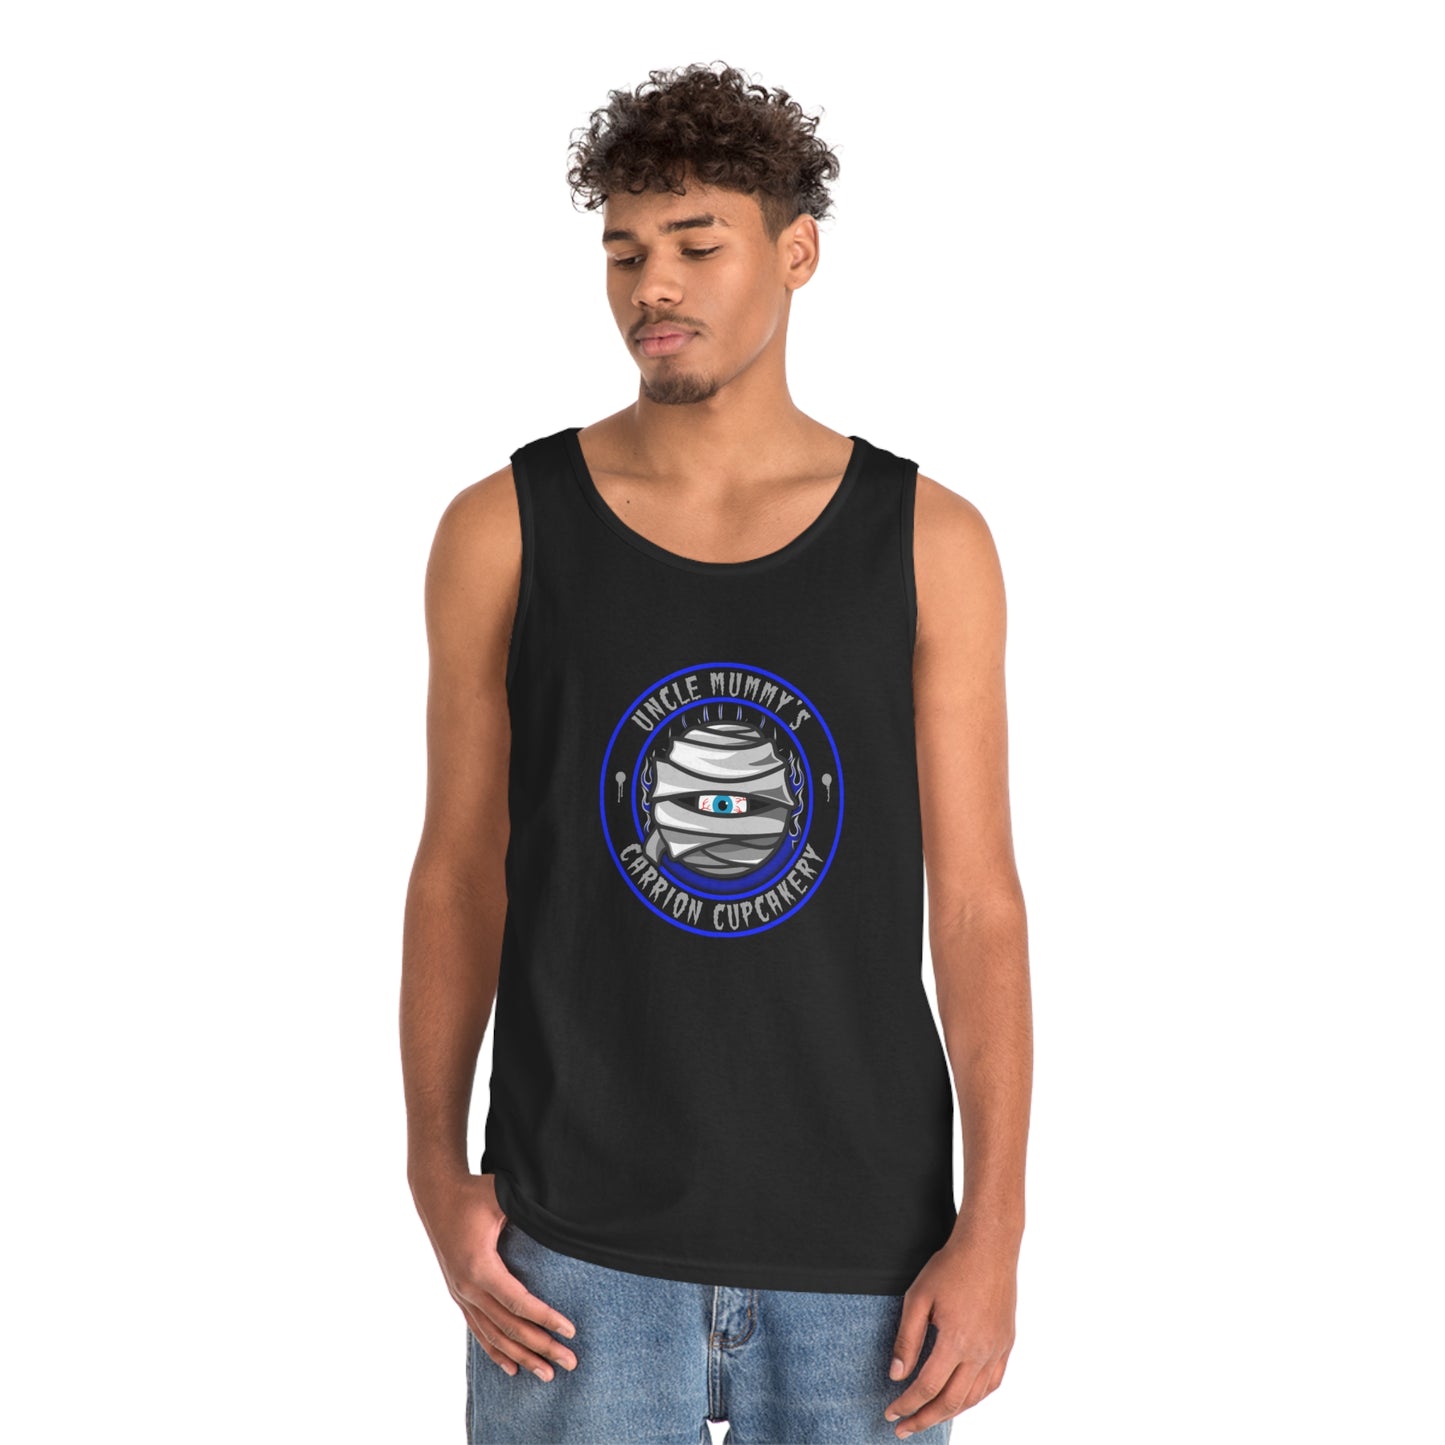 UNCLE MUMMY - CARRION CUPCAKERY  Unisex Heavy Cotton Tank Top